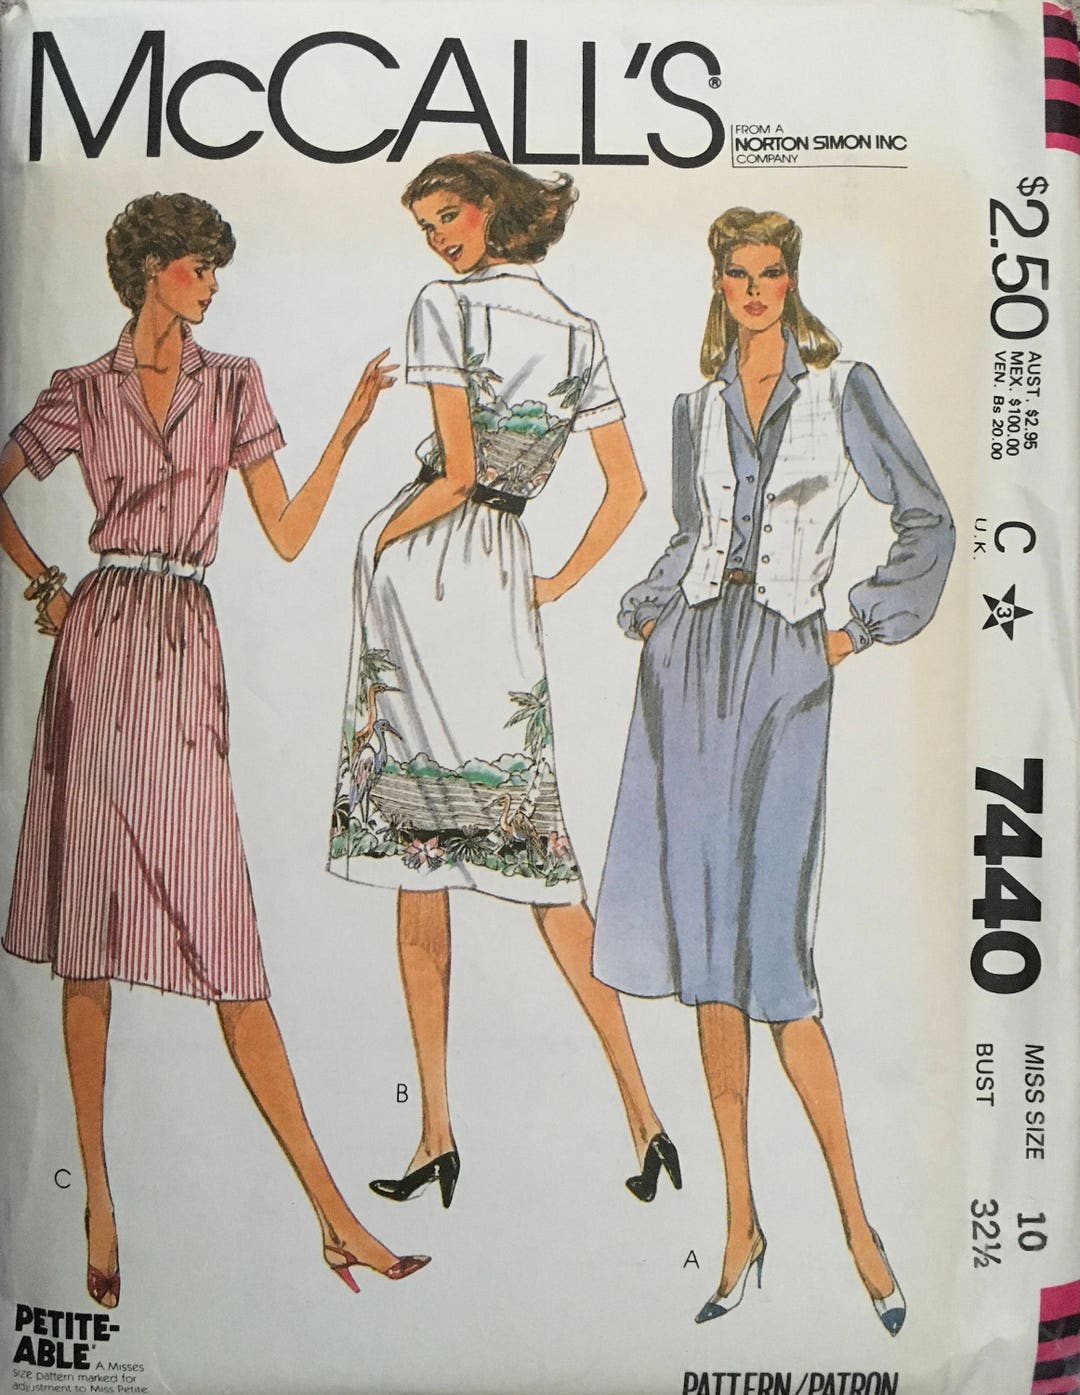 Mccall's 7440 Sewing Pattern vintage UNCUT - Etsy